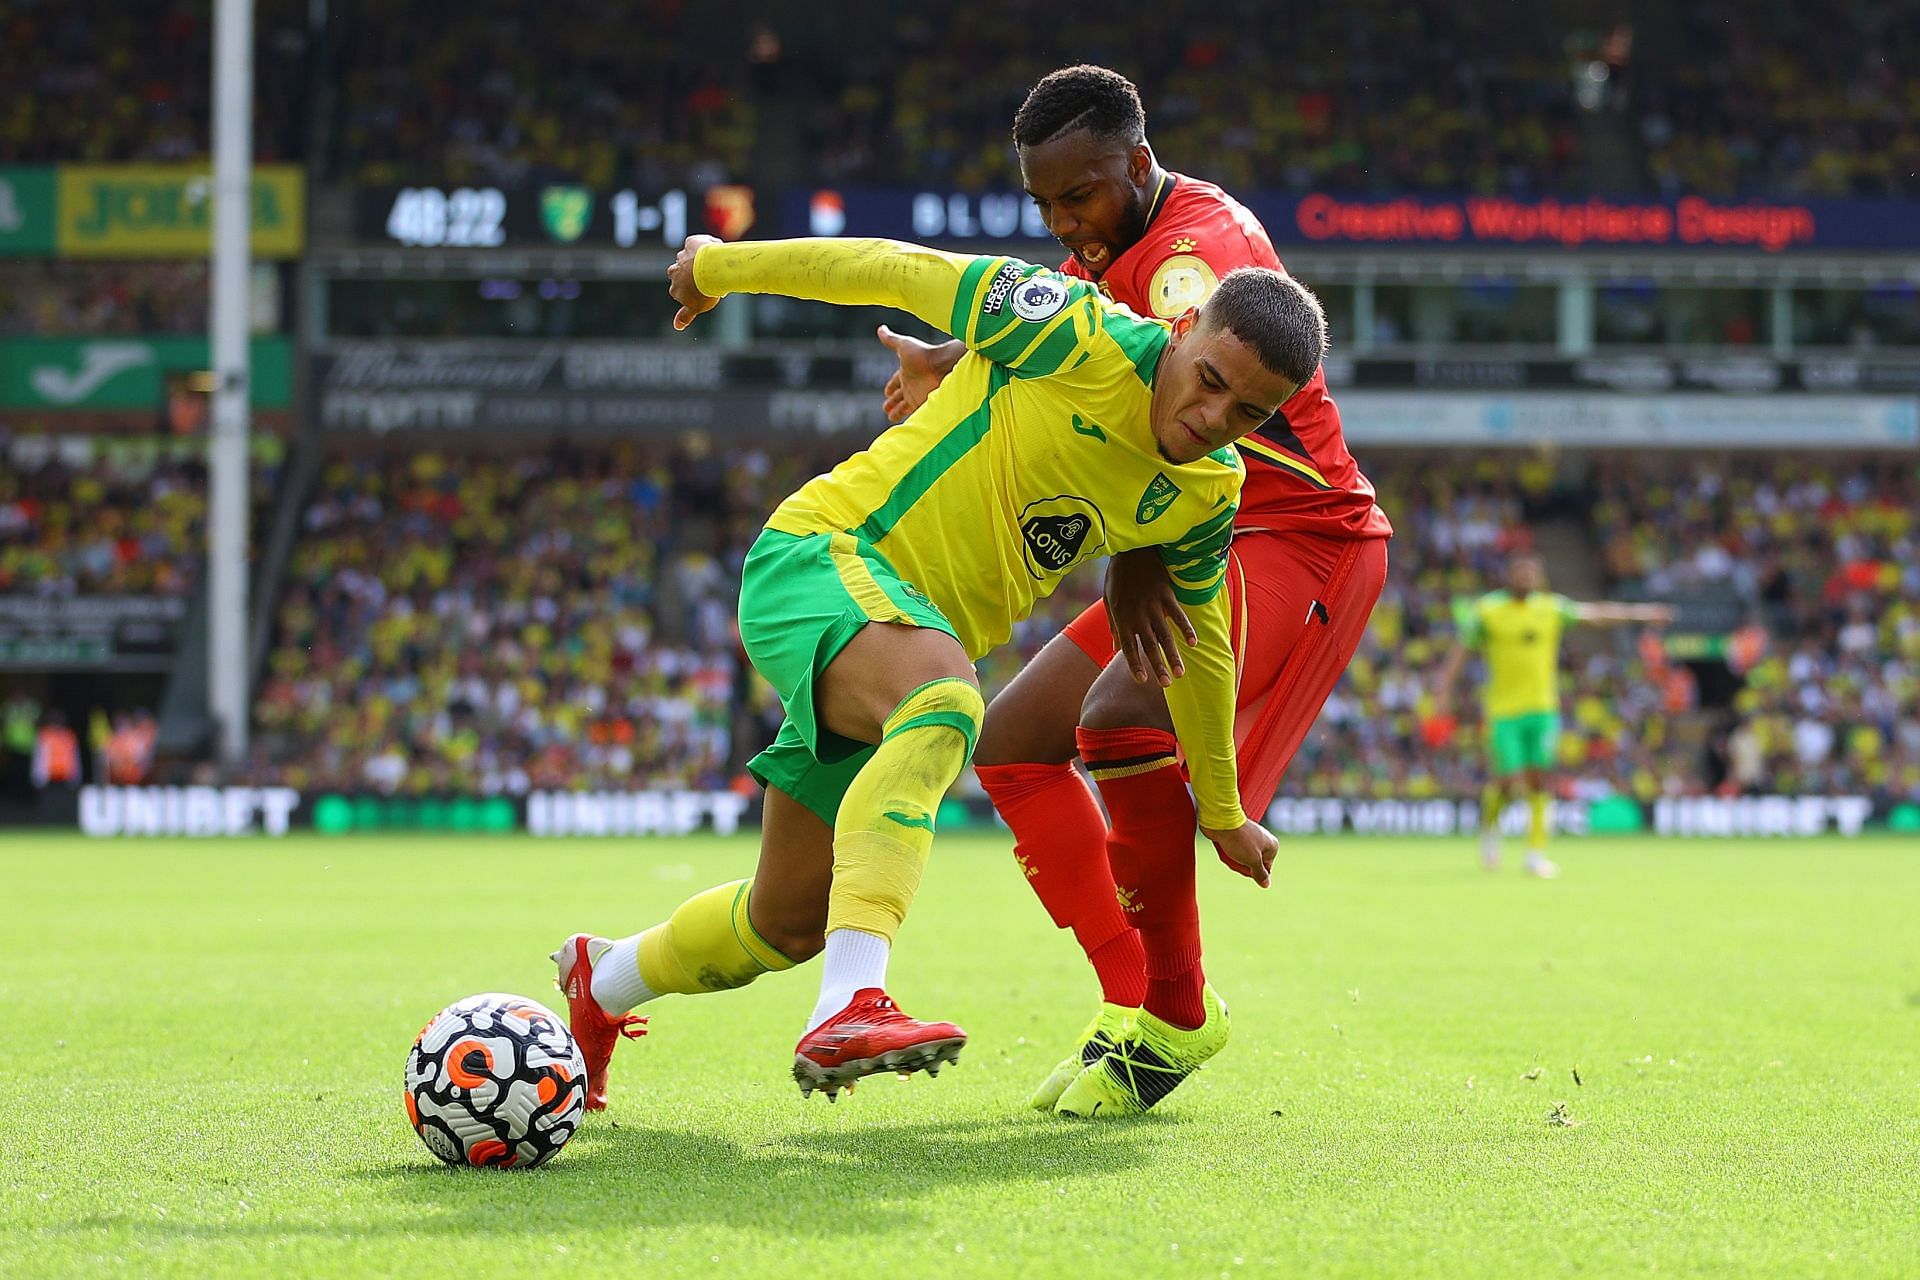 Norwich City take on Watford this week